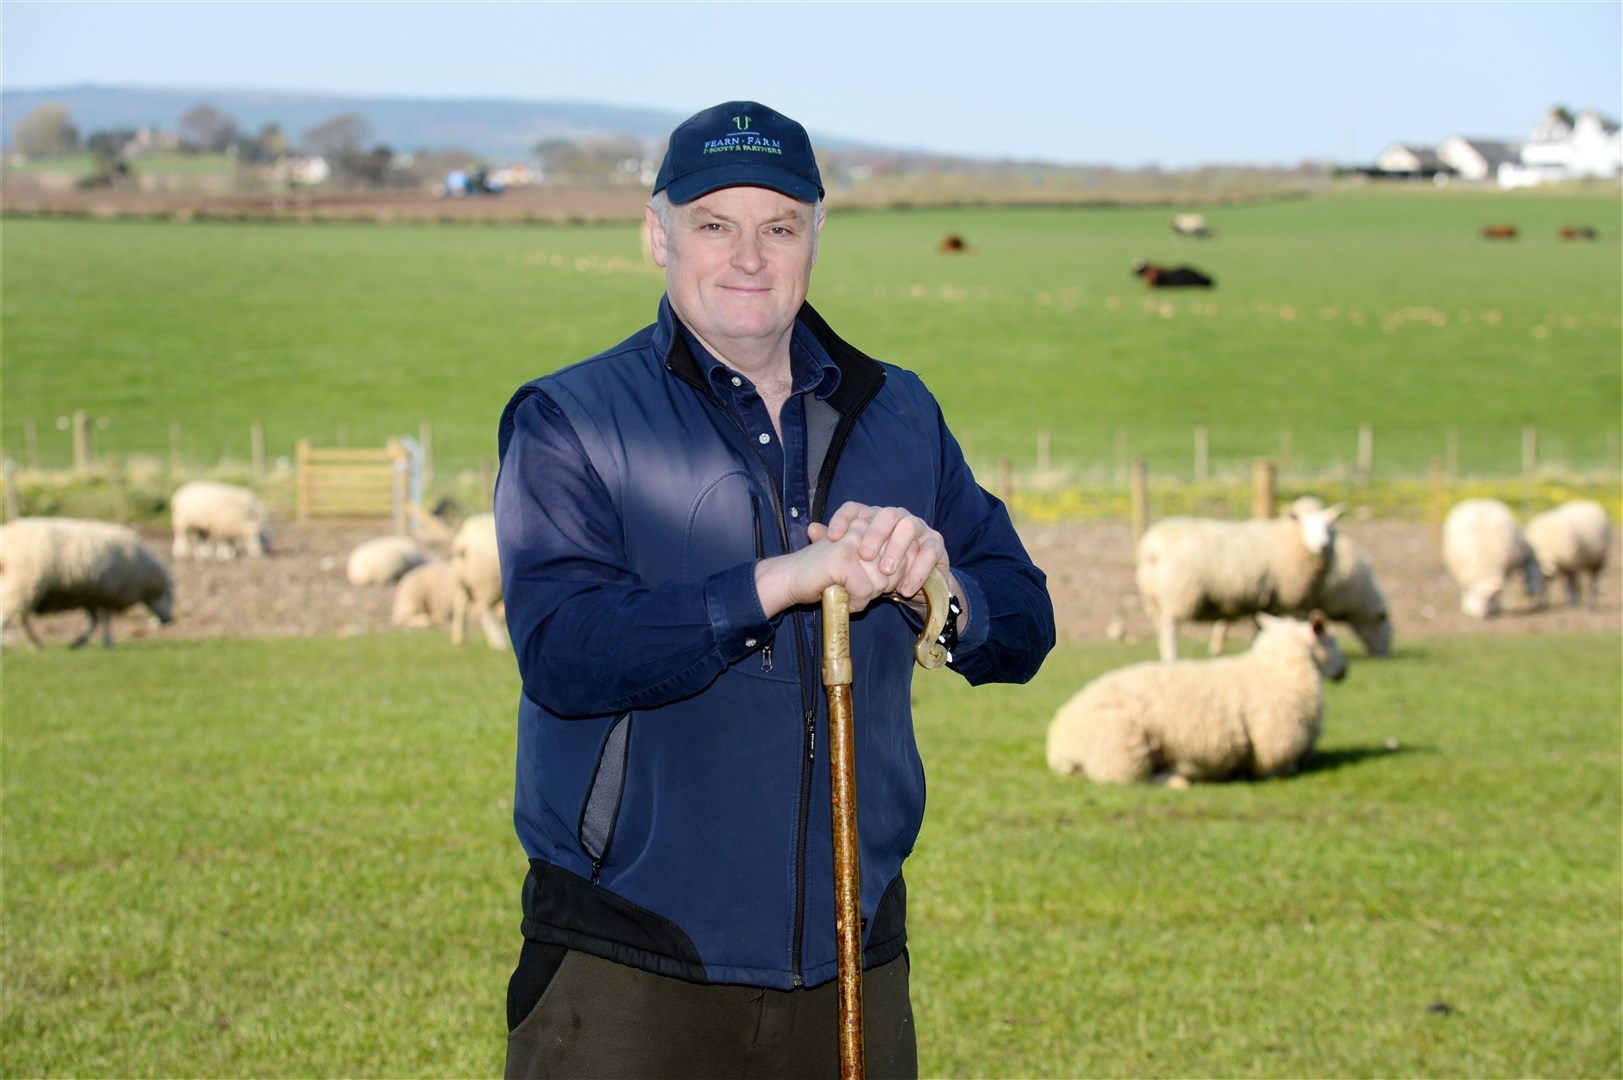 John Scott of Fearn Farm was delighted with the success of the sale.